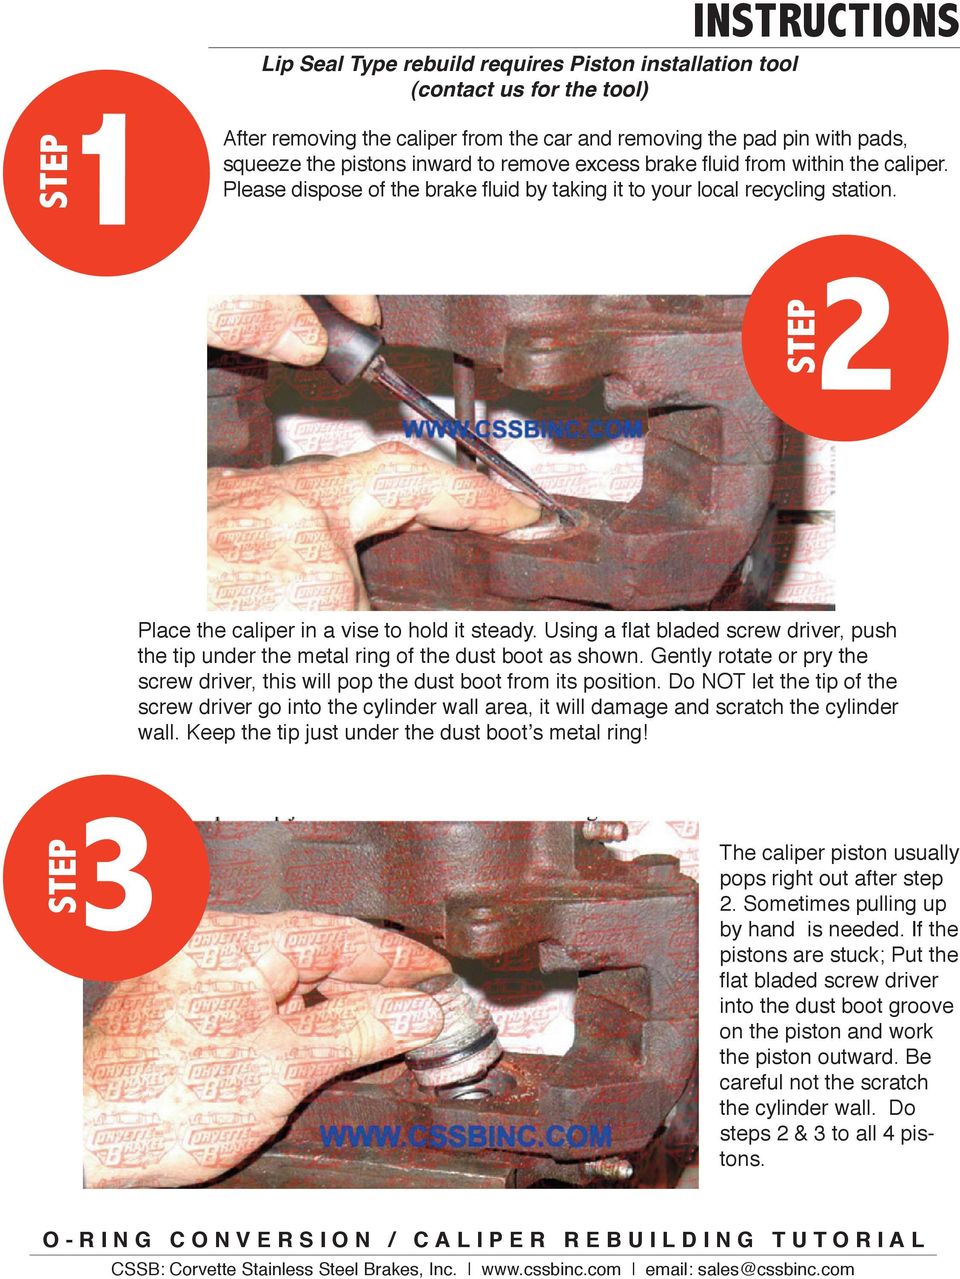 Using a flat bladed screw driver, push the tip under the metal ring of the dust boot as shown. Gently rotate or pry the screw driver, this will pop the dust boot from its position.